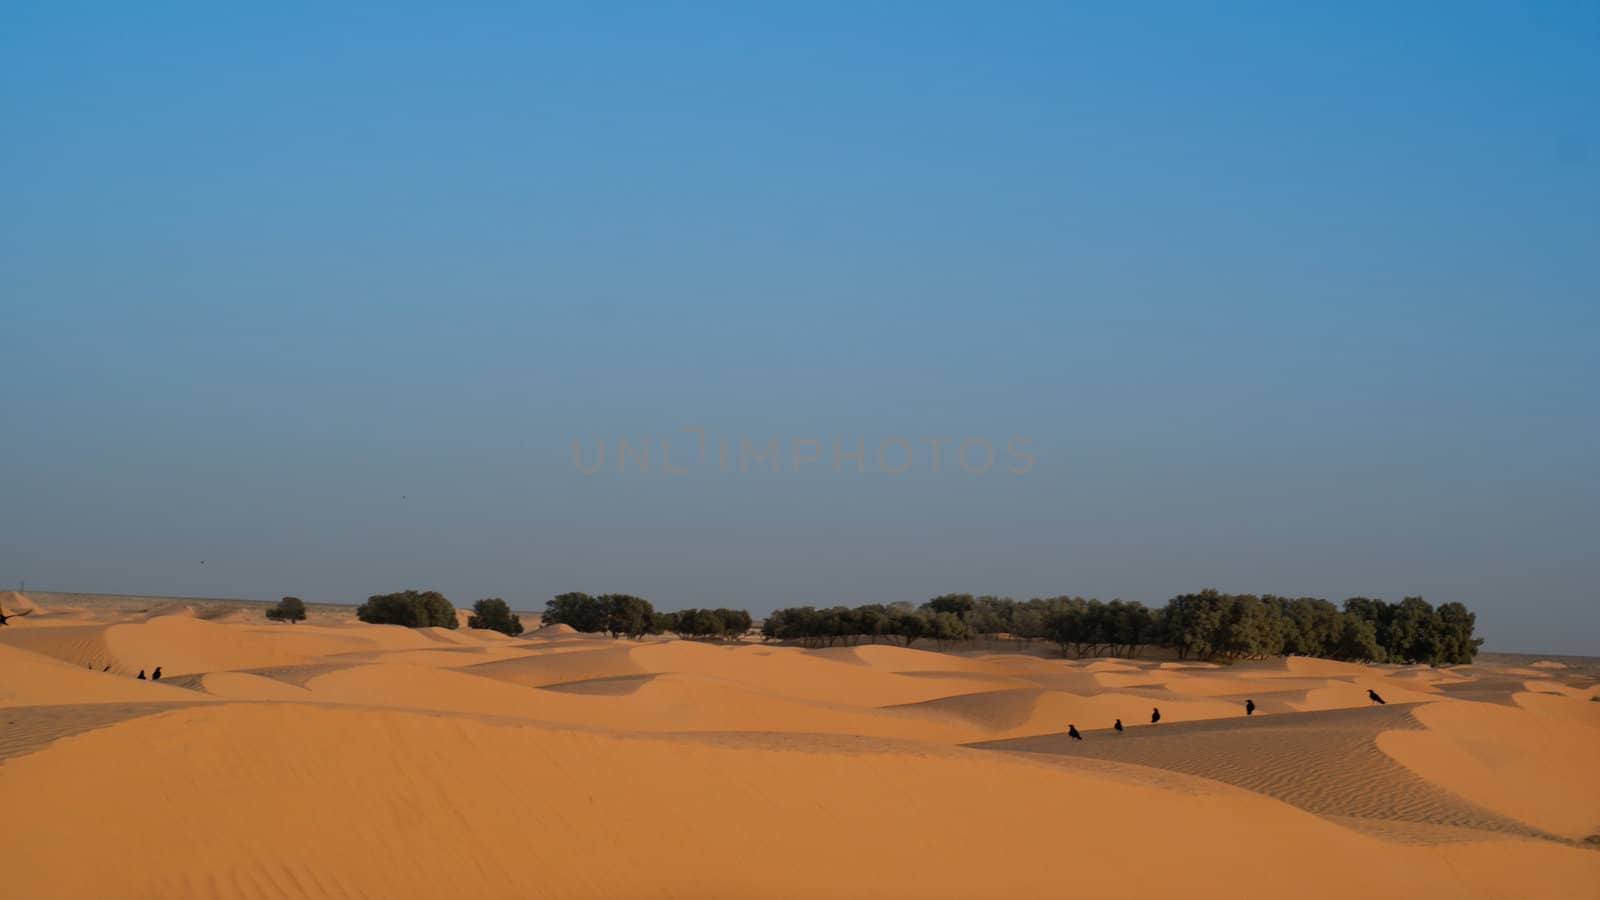 Oasis in Sahara by mimocas29